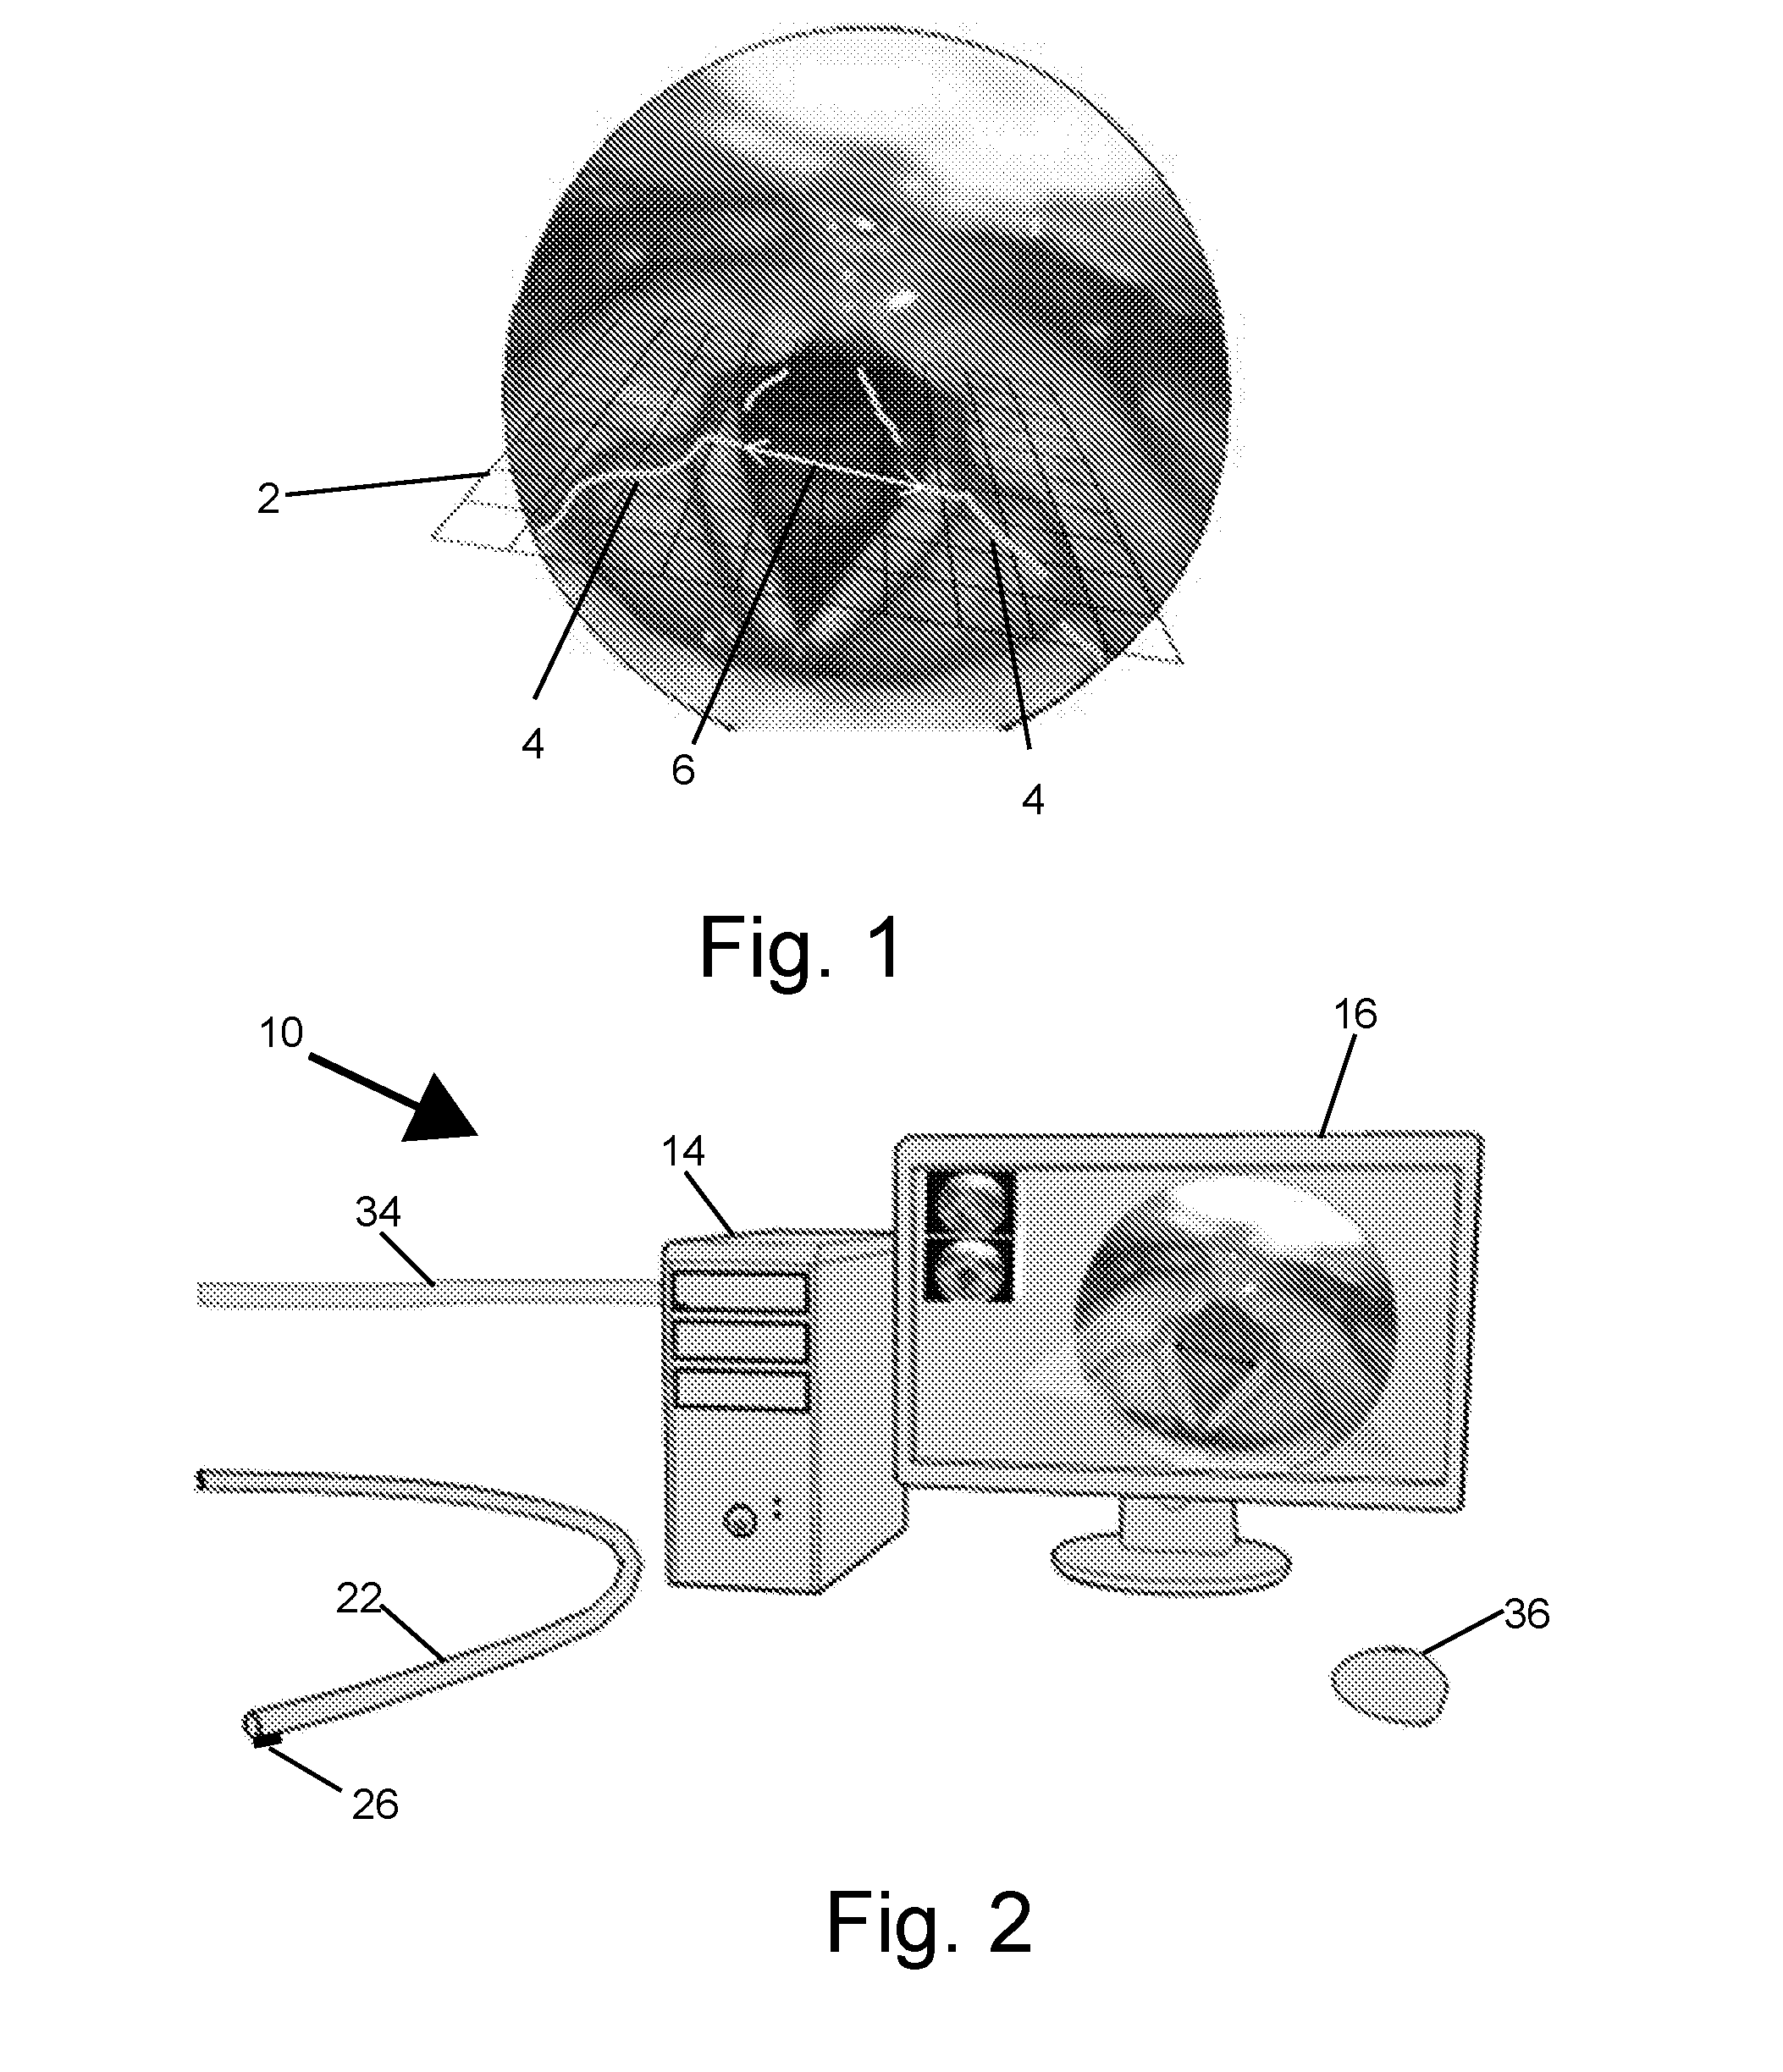 Endoscopic measurement system and method